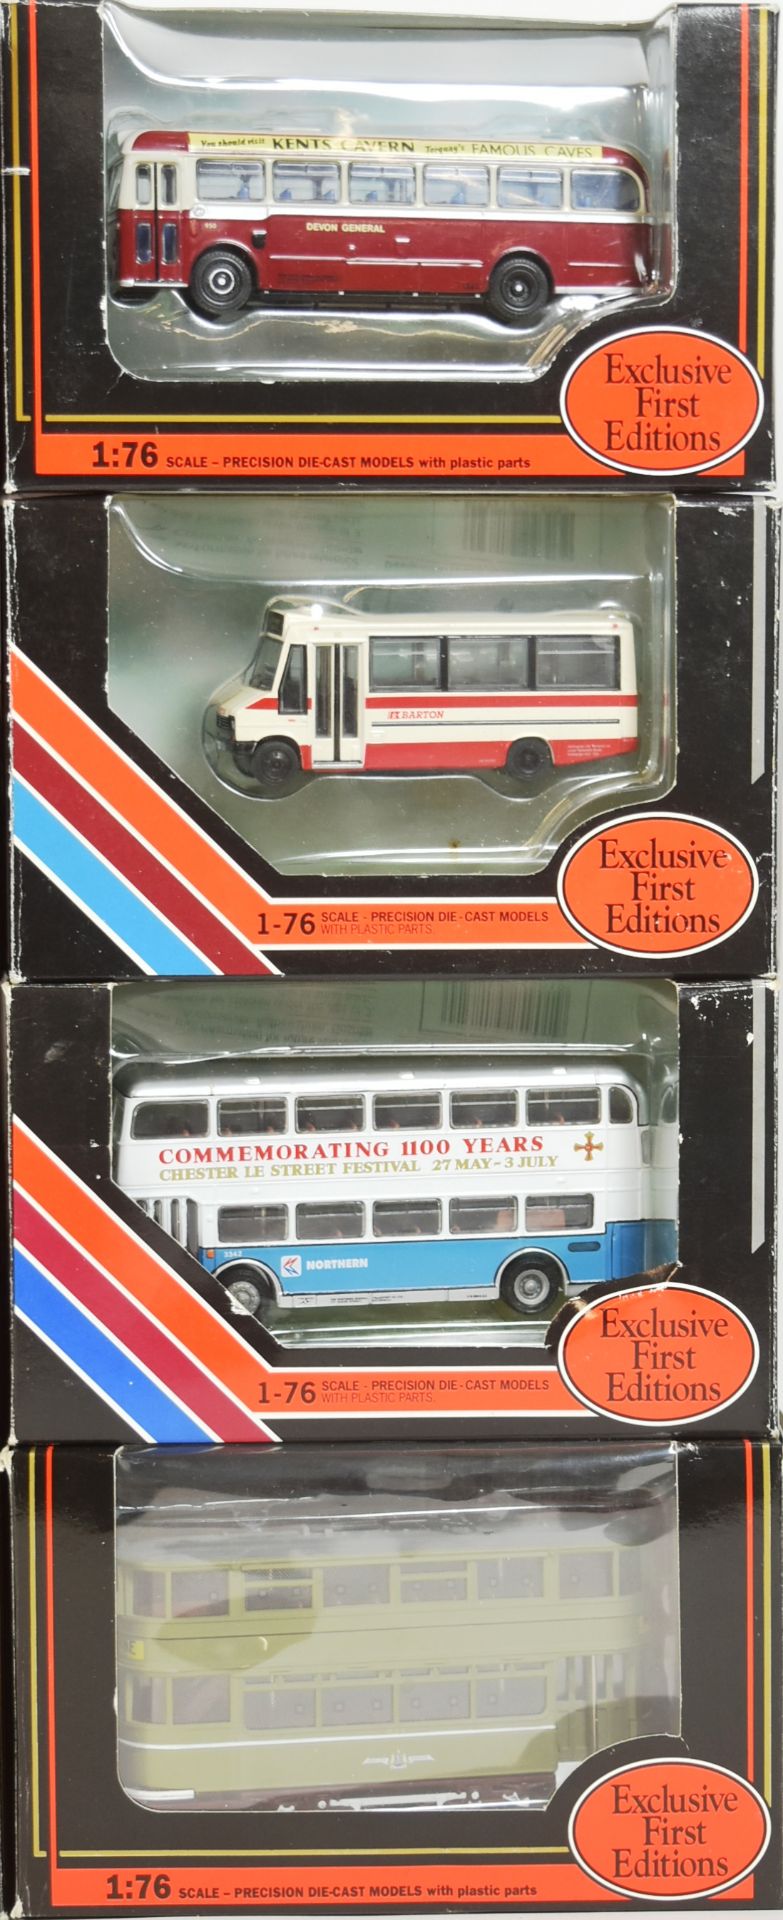 DIECAST - EFE EXCLUSIVE FIRST EDITIONS DIECAST MODEL BUSES - Image 6 of 6